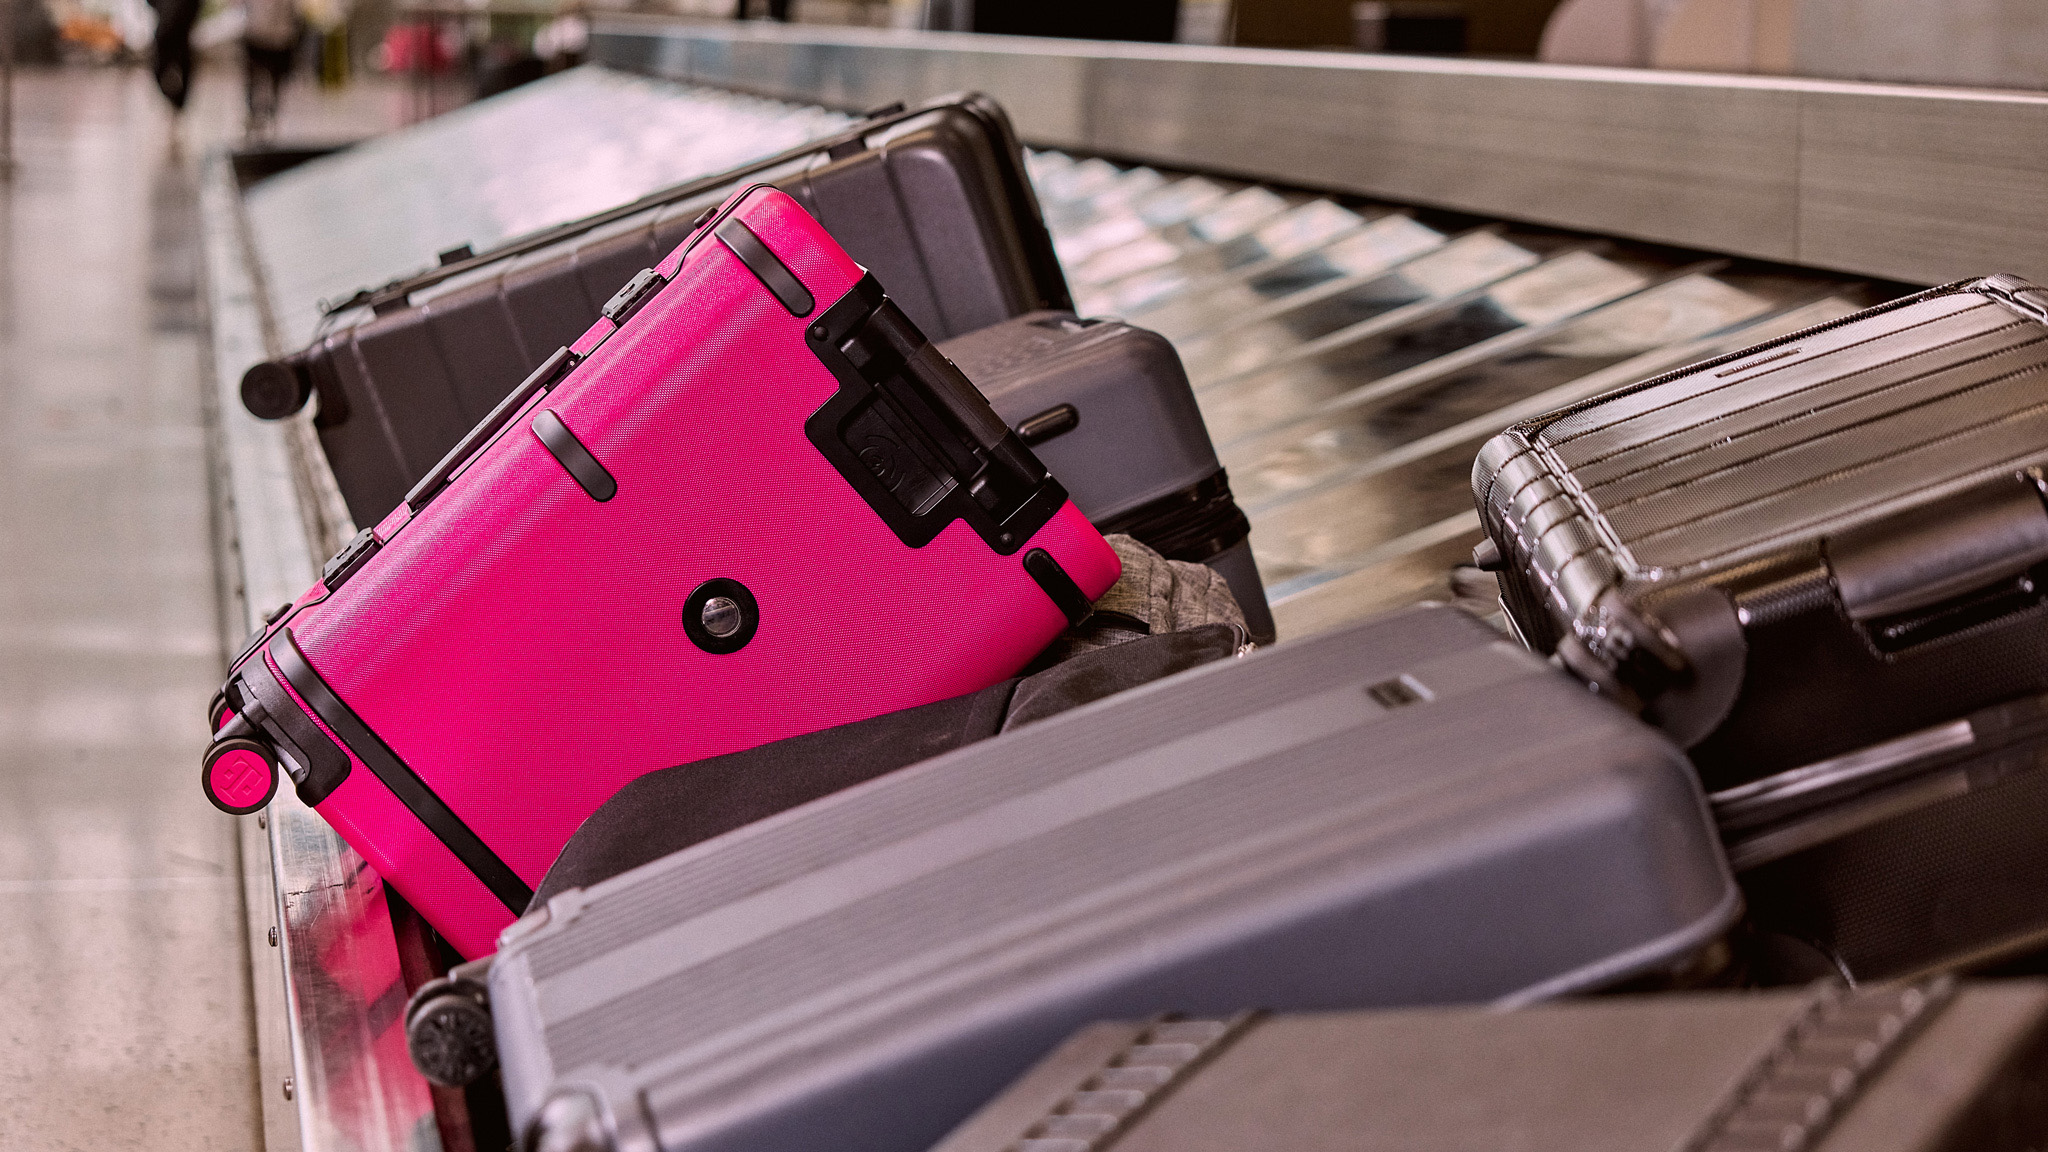 t-mobile-rolled-out-a-hot-magenta-smart-suitcase-and-i-want-it-techradar